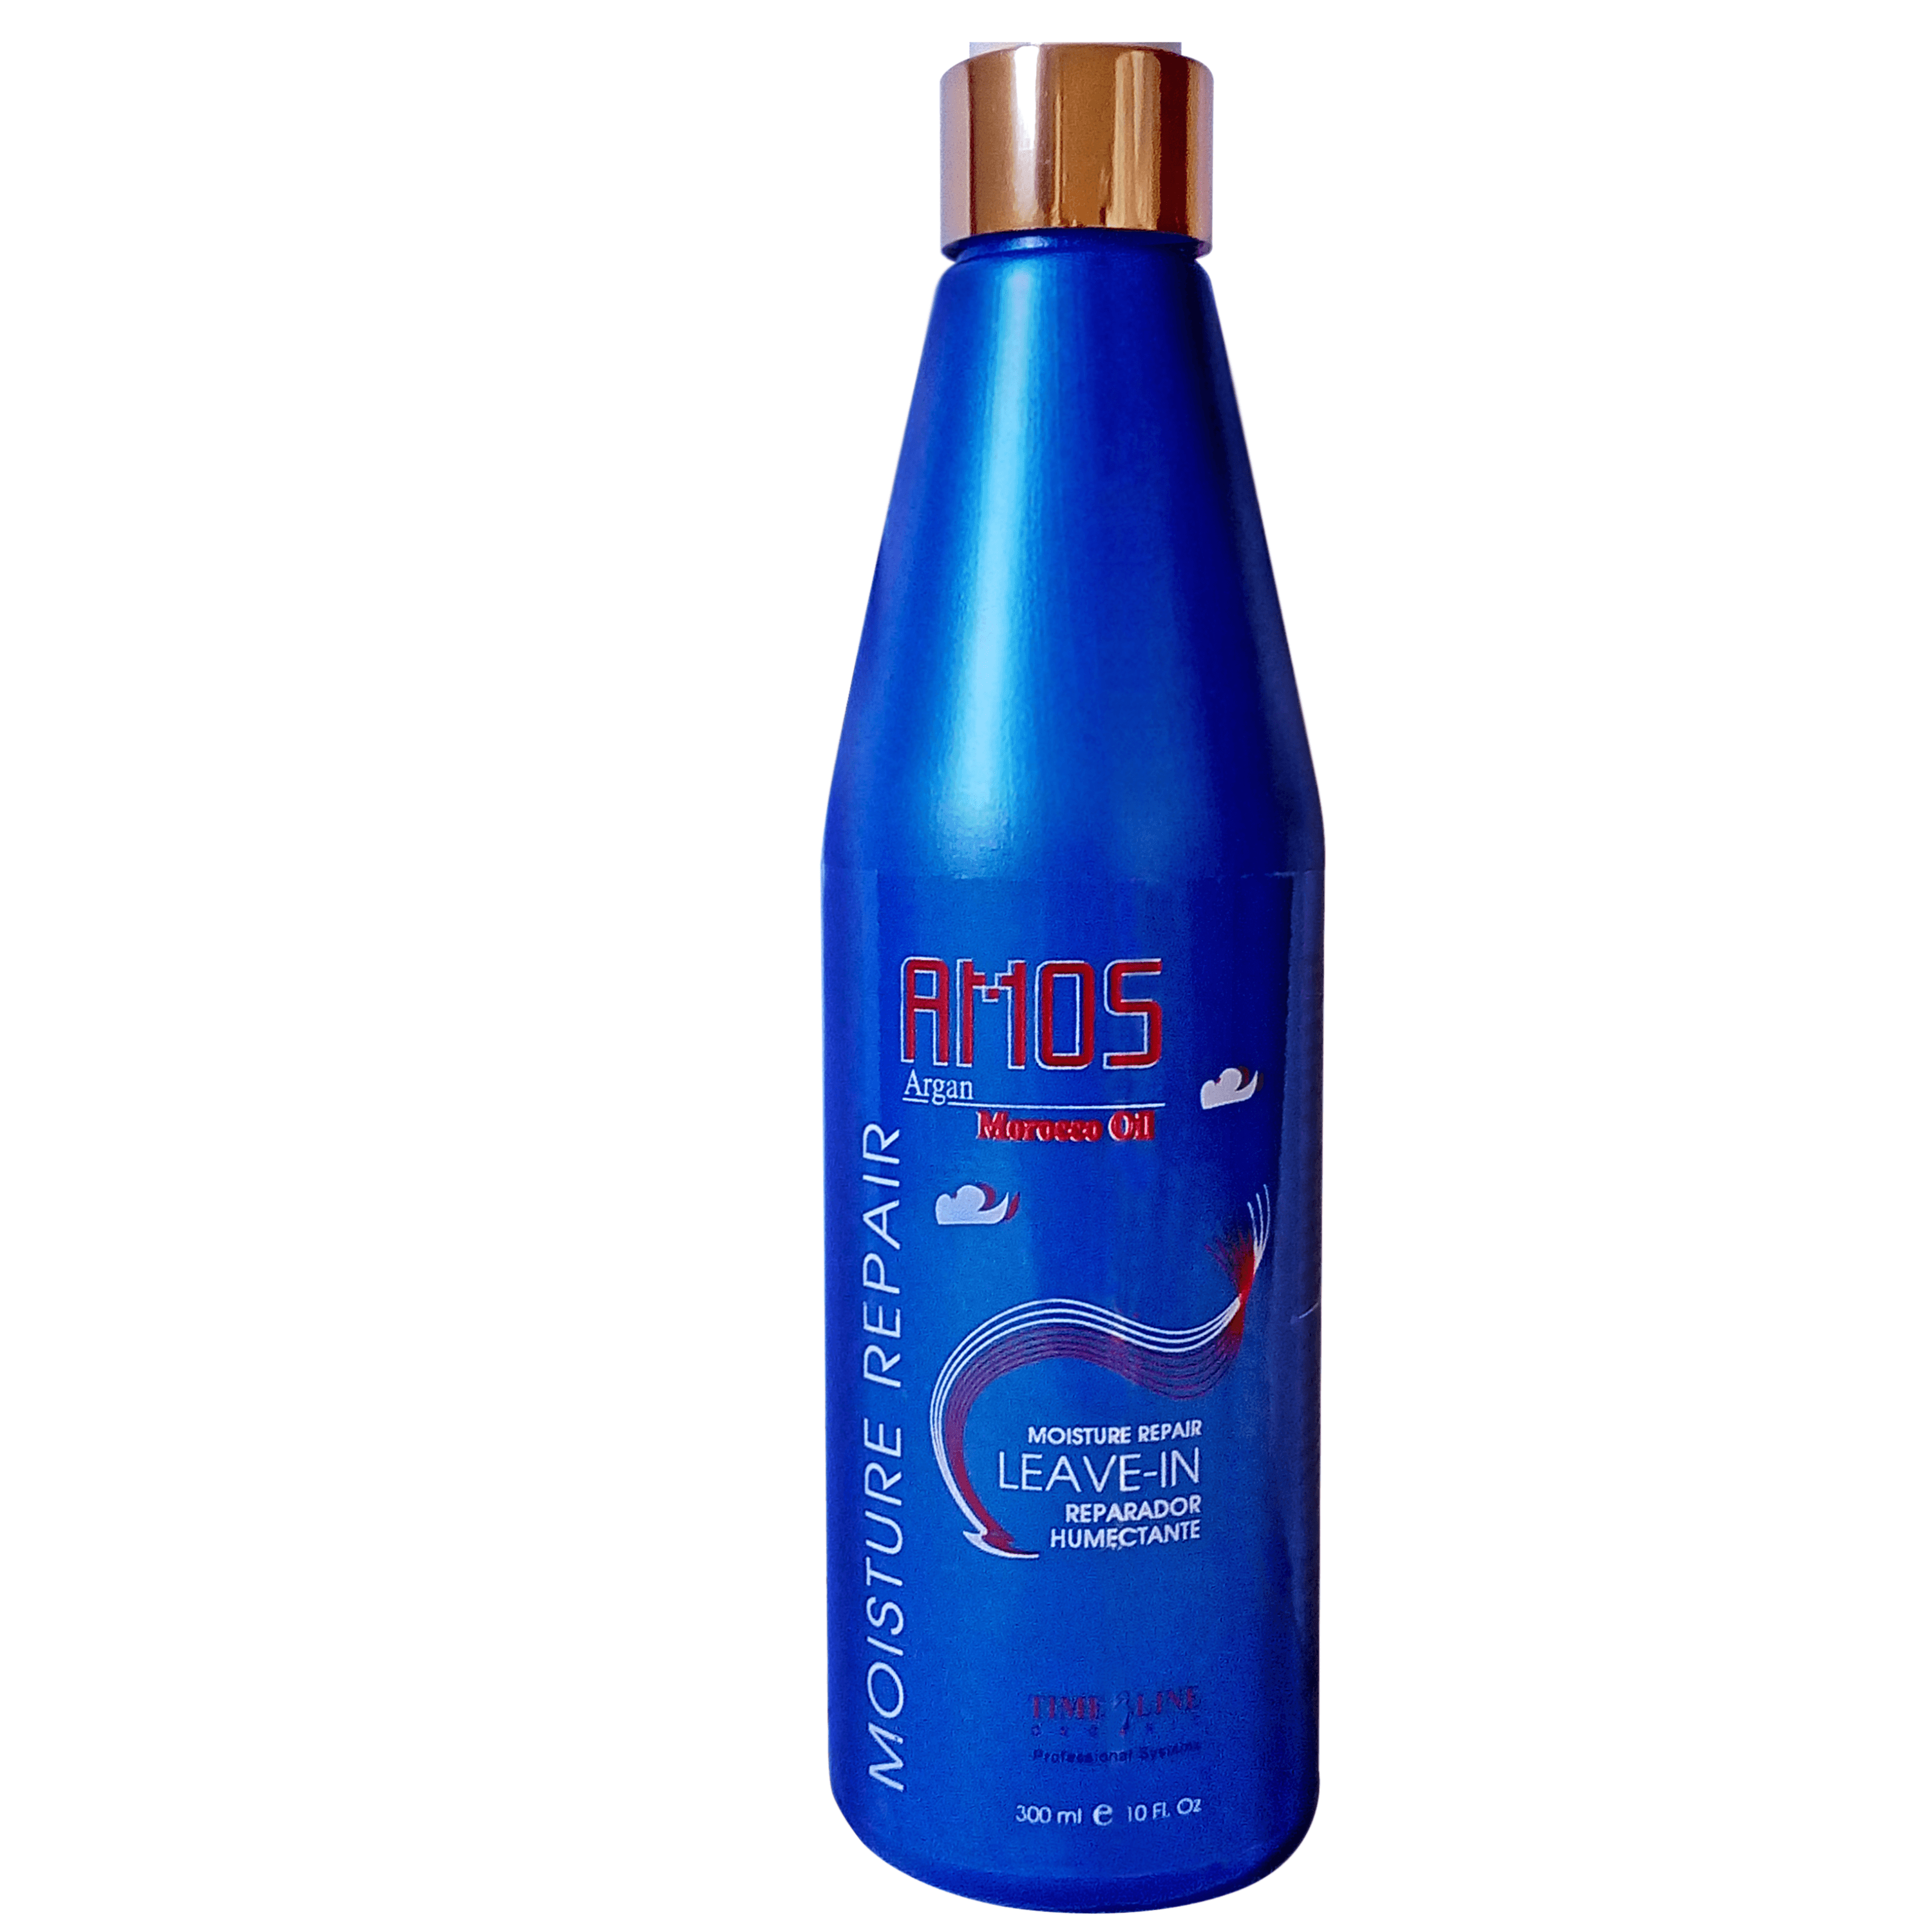 Argan Oil Leave-In Conditione - AMOSTIMELINE